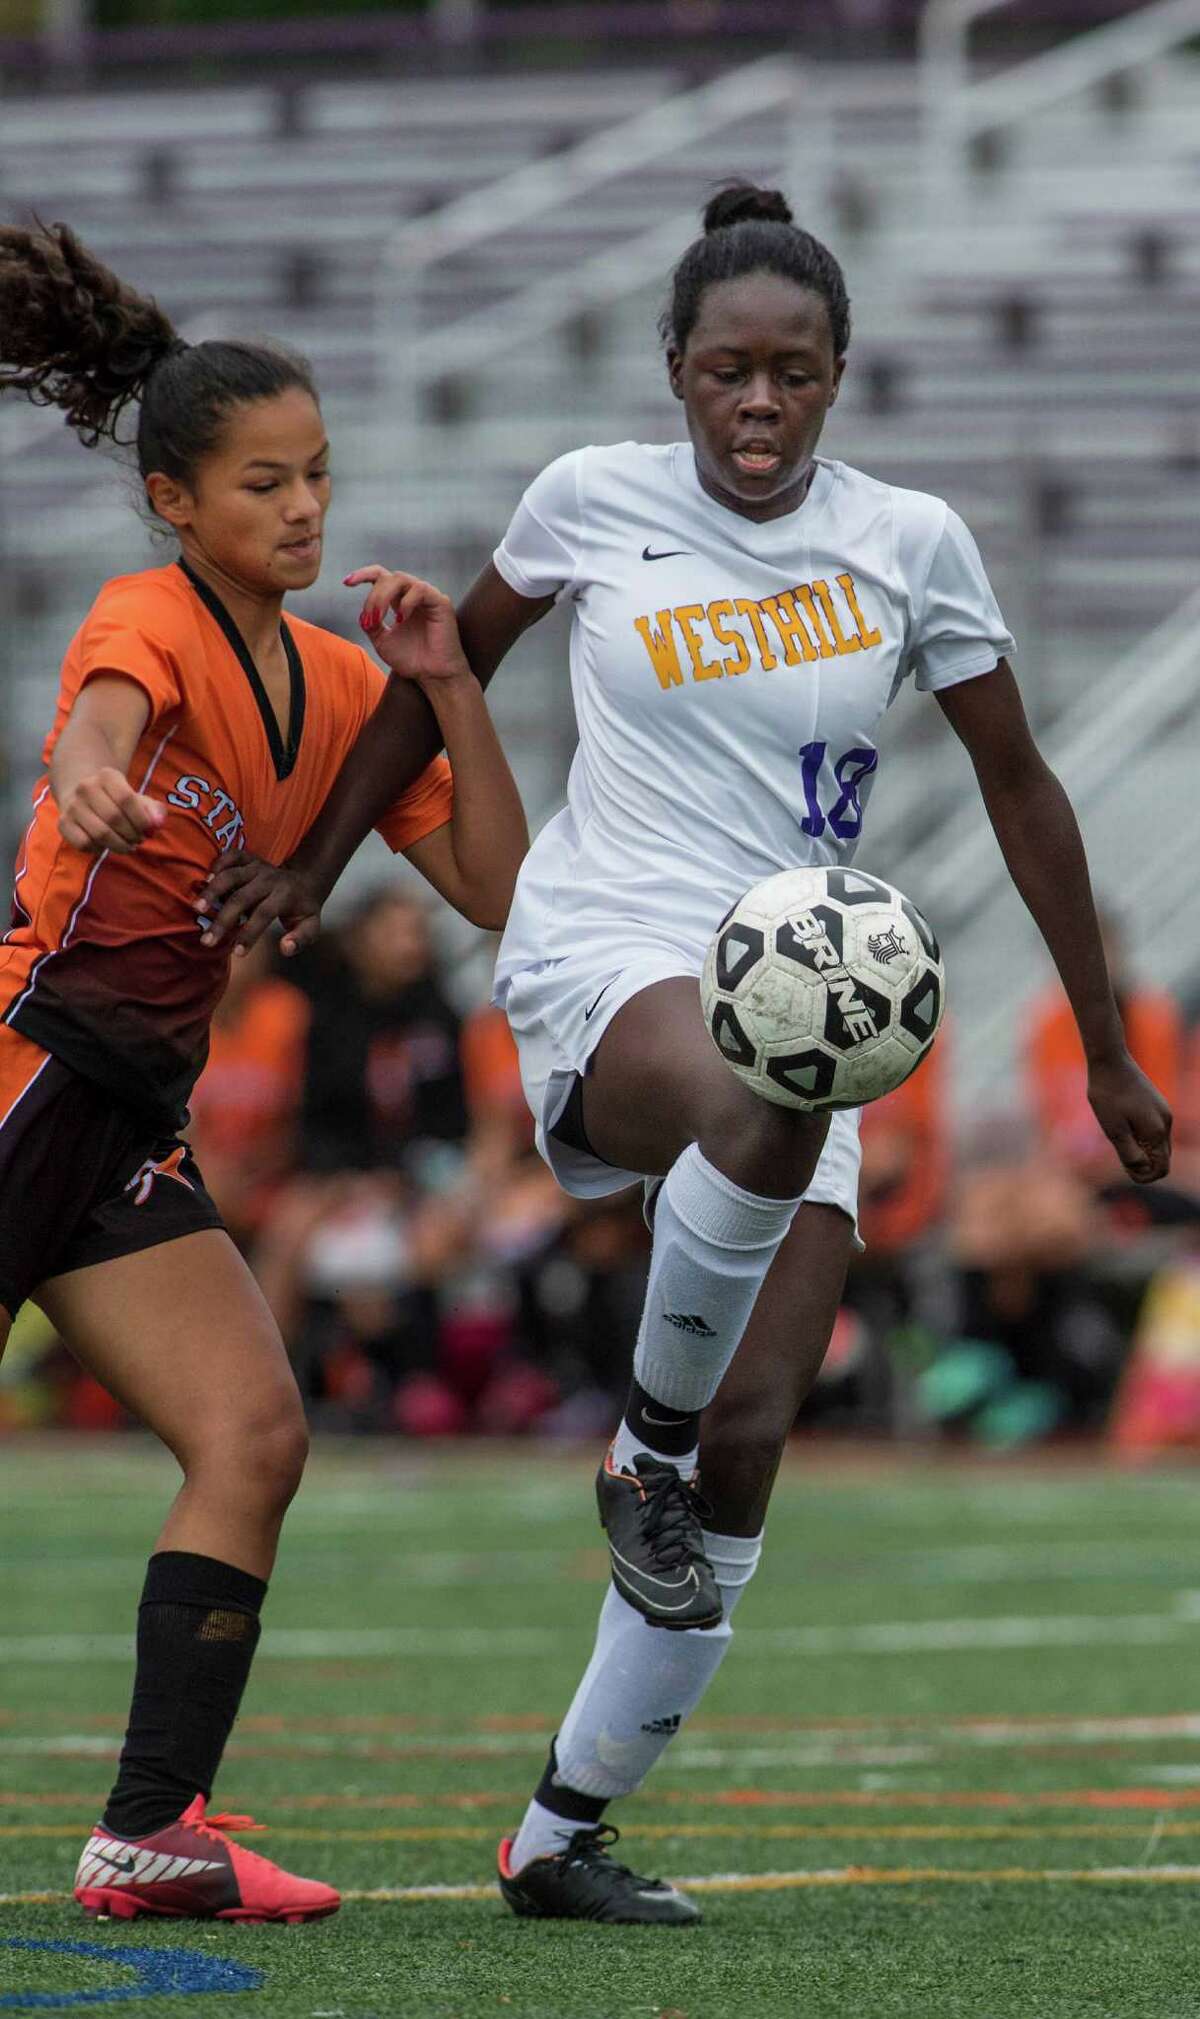 Westhill’s Chelsea Domond, right, and Stamford’s Estefanie Cabrera fight for the ball during a girls soccer game played at Westhill High School in Stamford on Saturday. Domond scored two goals to help Westhill capture the city championship, 3-0.